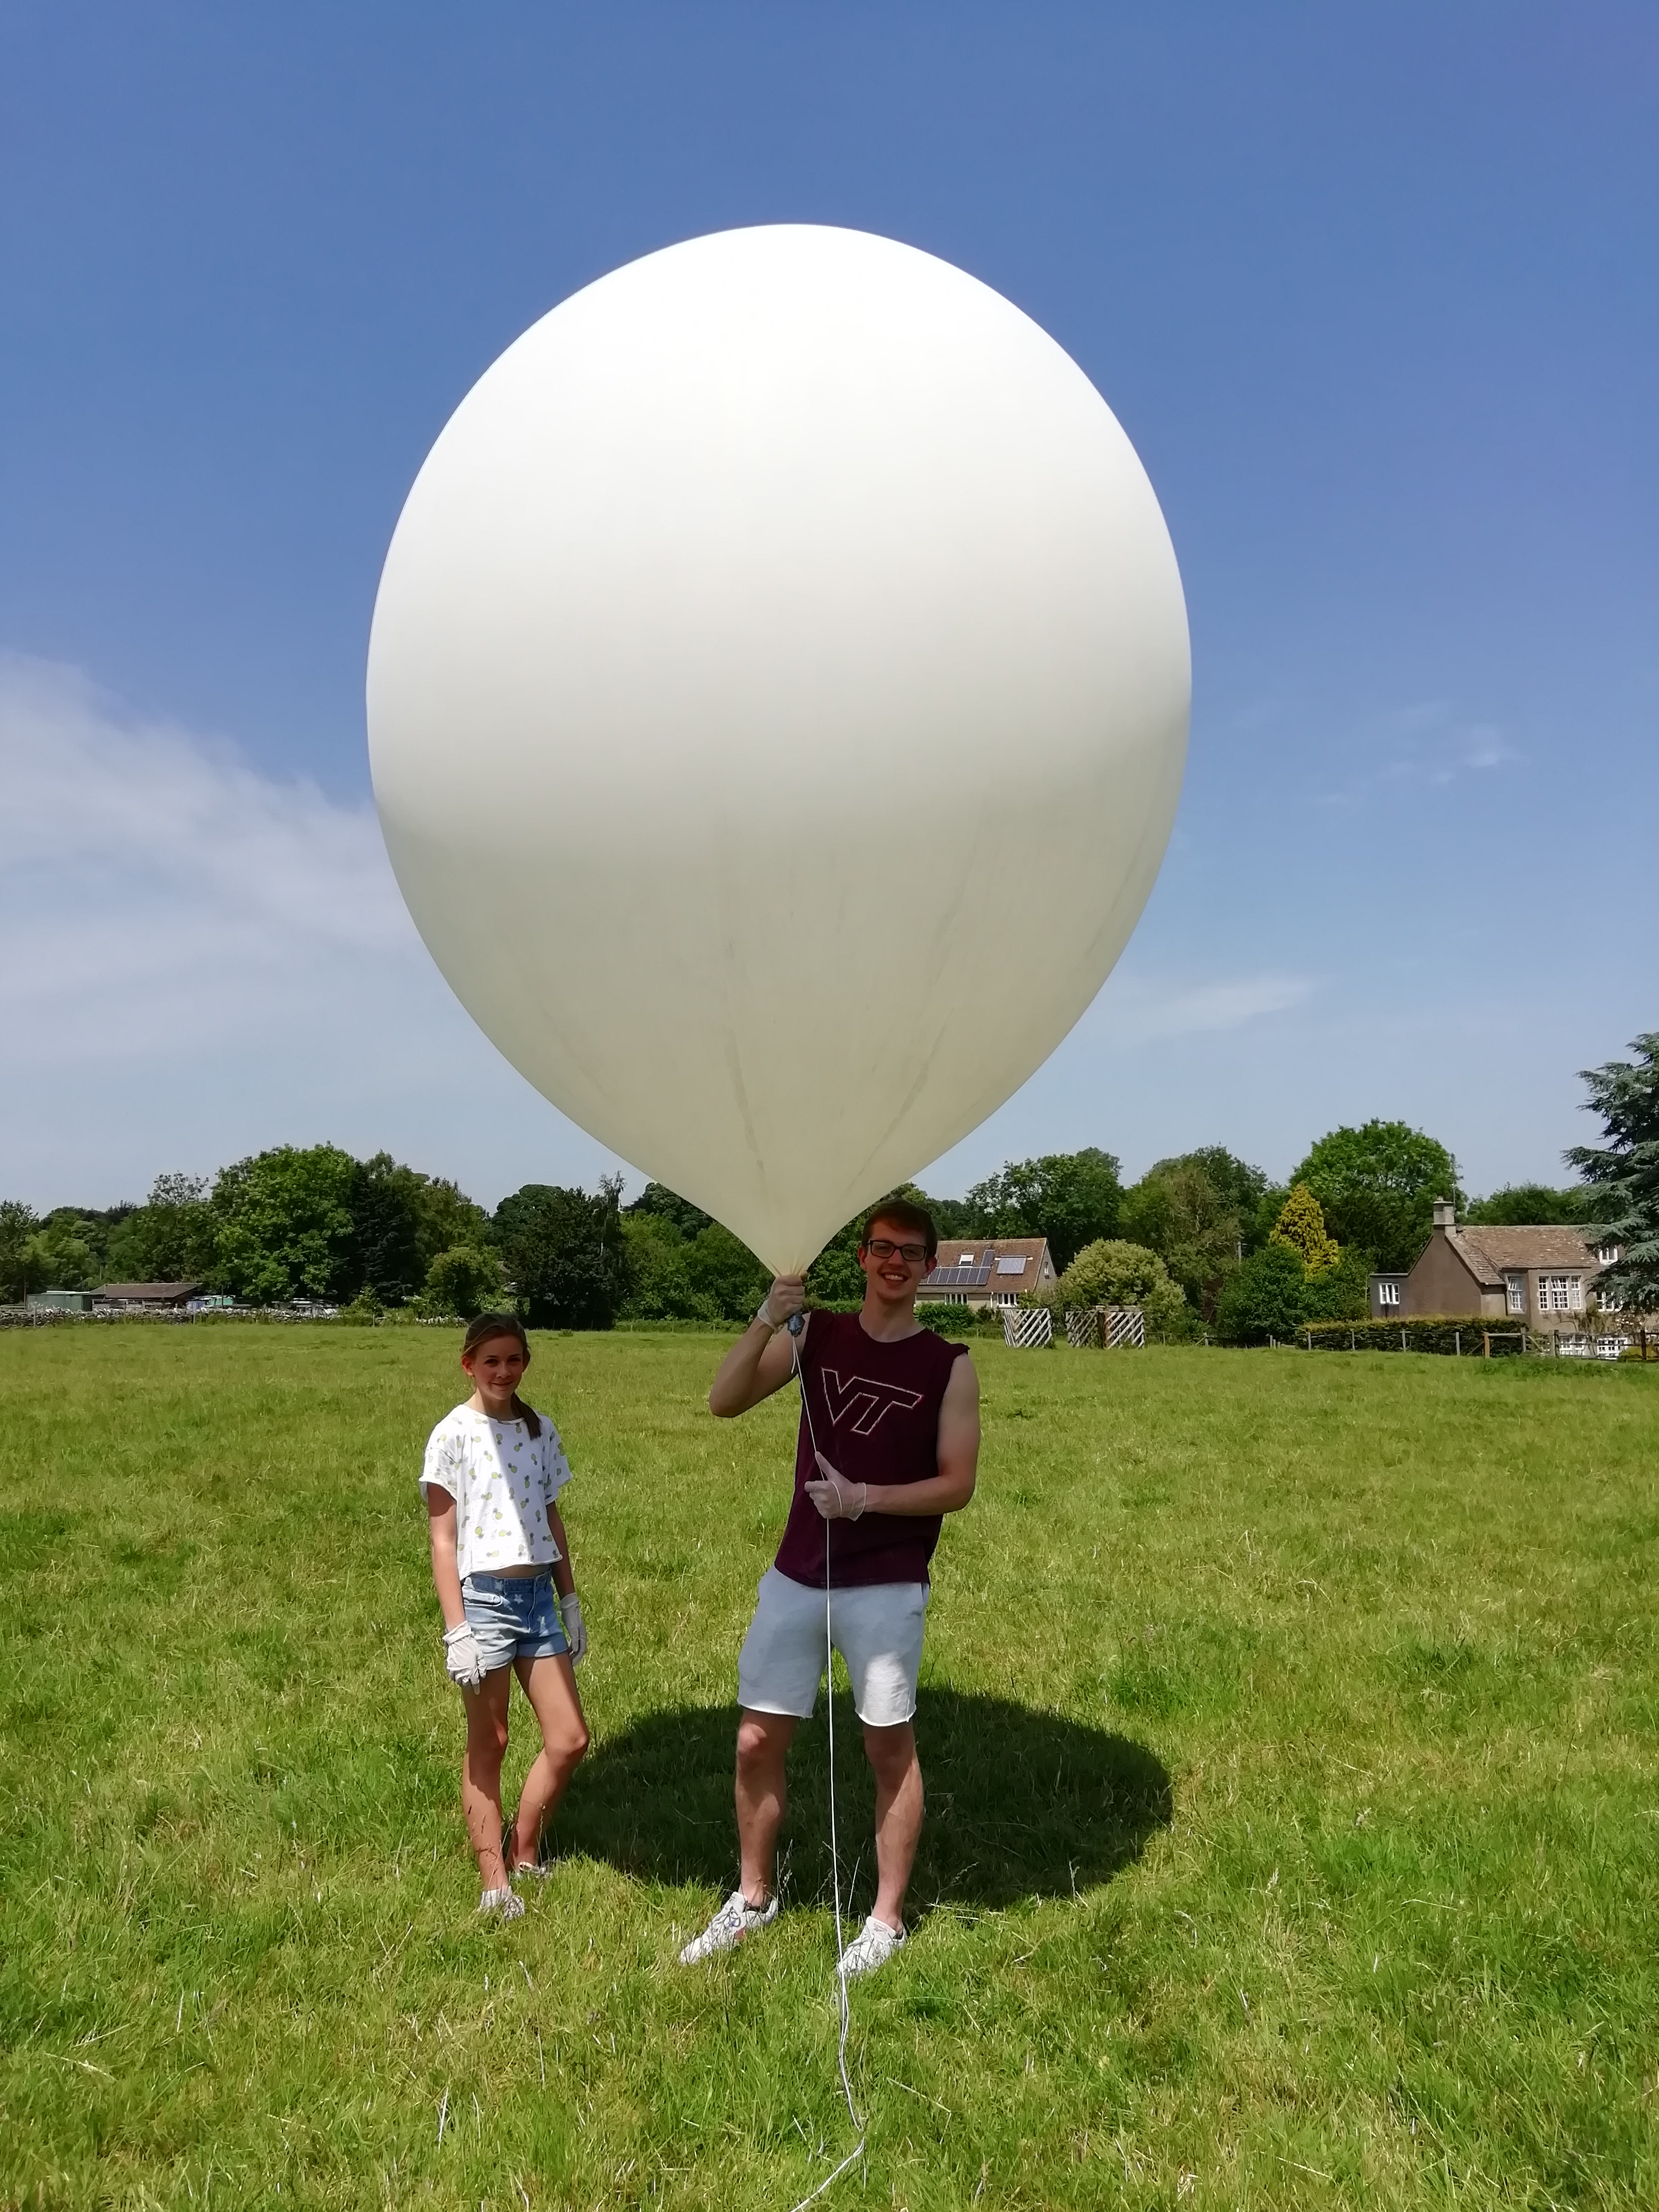 Amelia and Matthew are given the job of hanging onto the inflated balloon until we were ready to launch